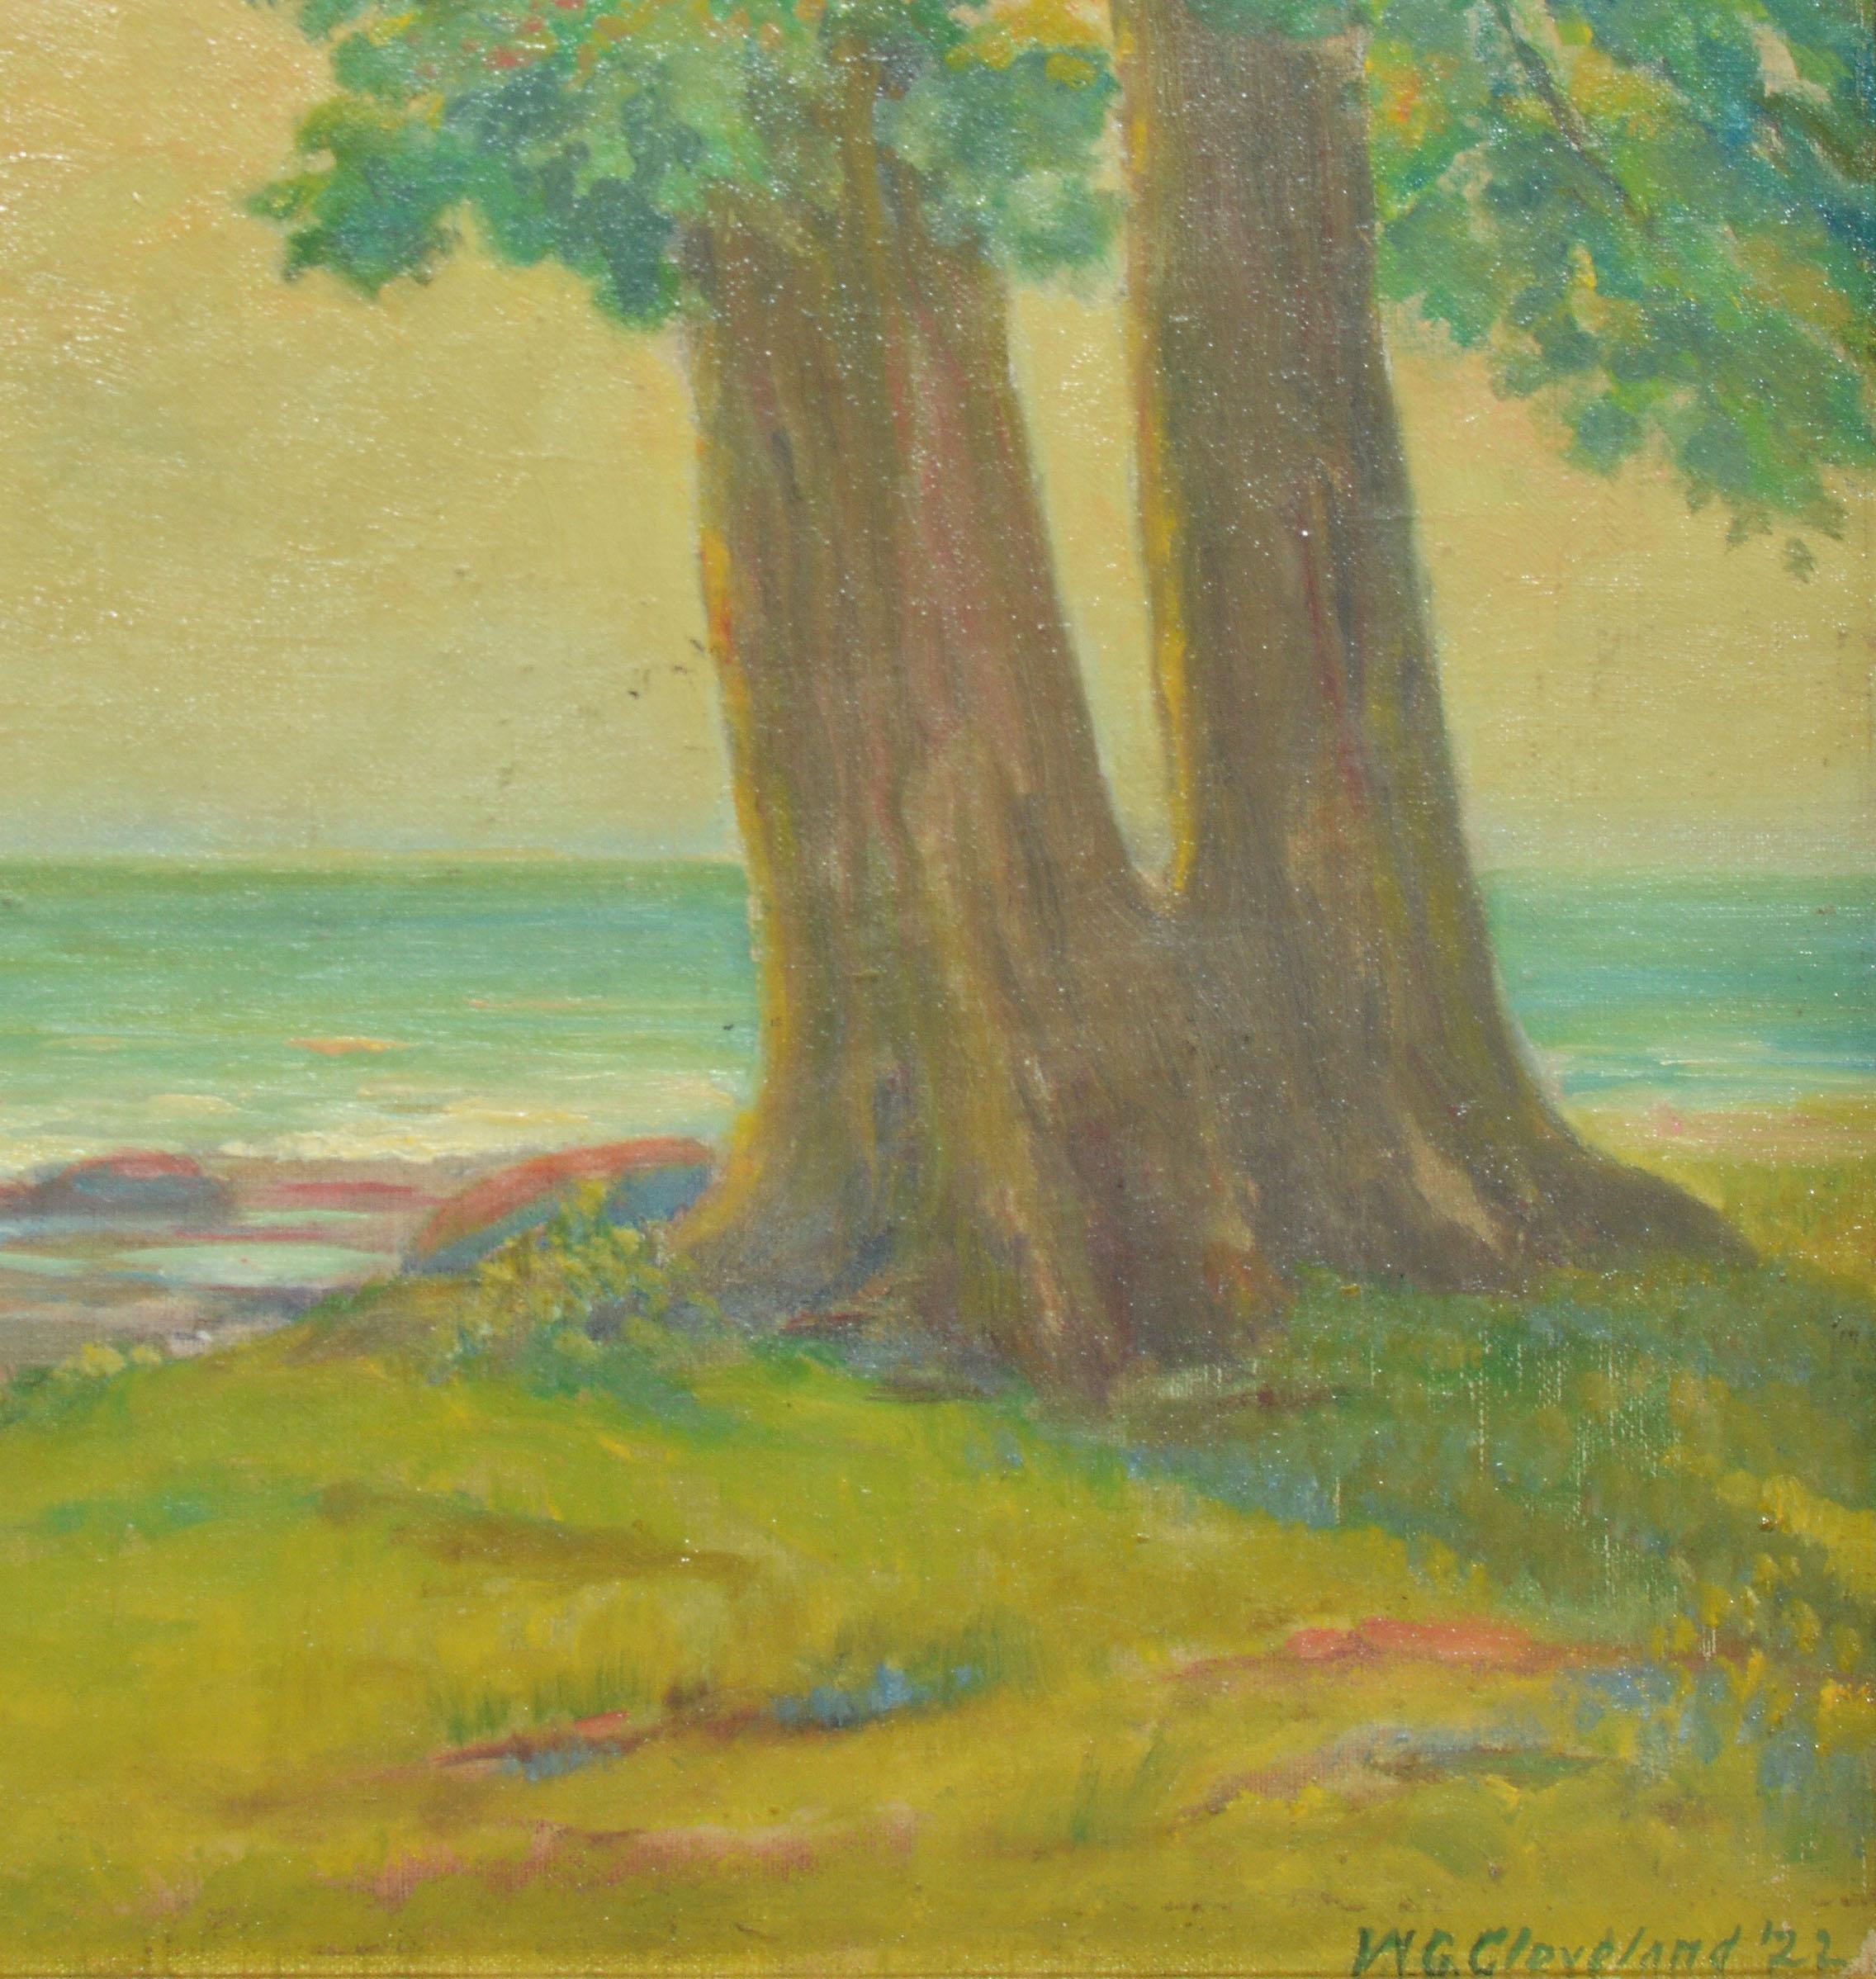 Impressionist view of a beach by Walter Cleveland.  Oil on board, circa 1900.  Signed.  Displayed in a period blackwood frame.  Image, 10